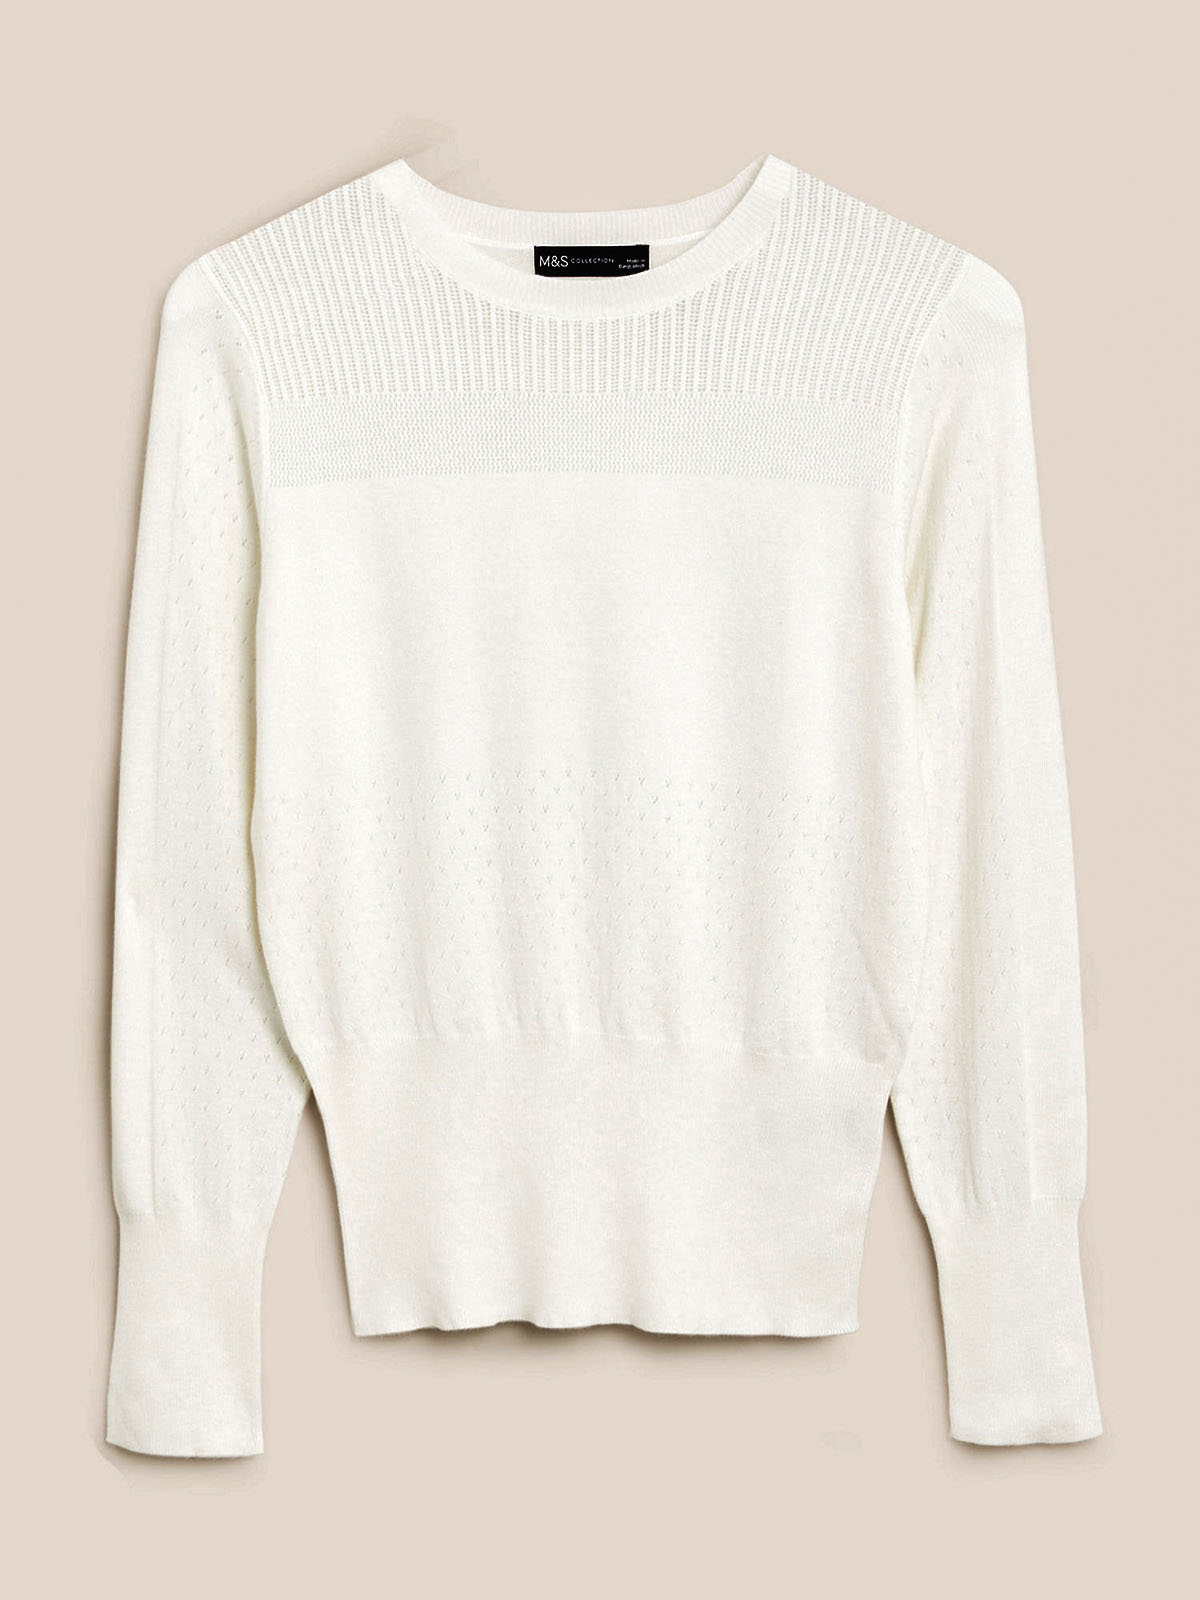 Marks and Spencer - - M&5 LIGHT-CREAM Textured Crew Neck Button Detail ...